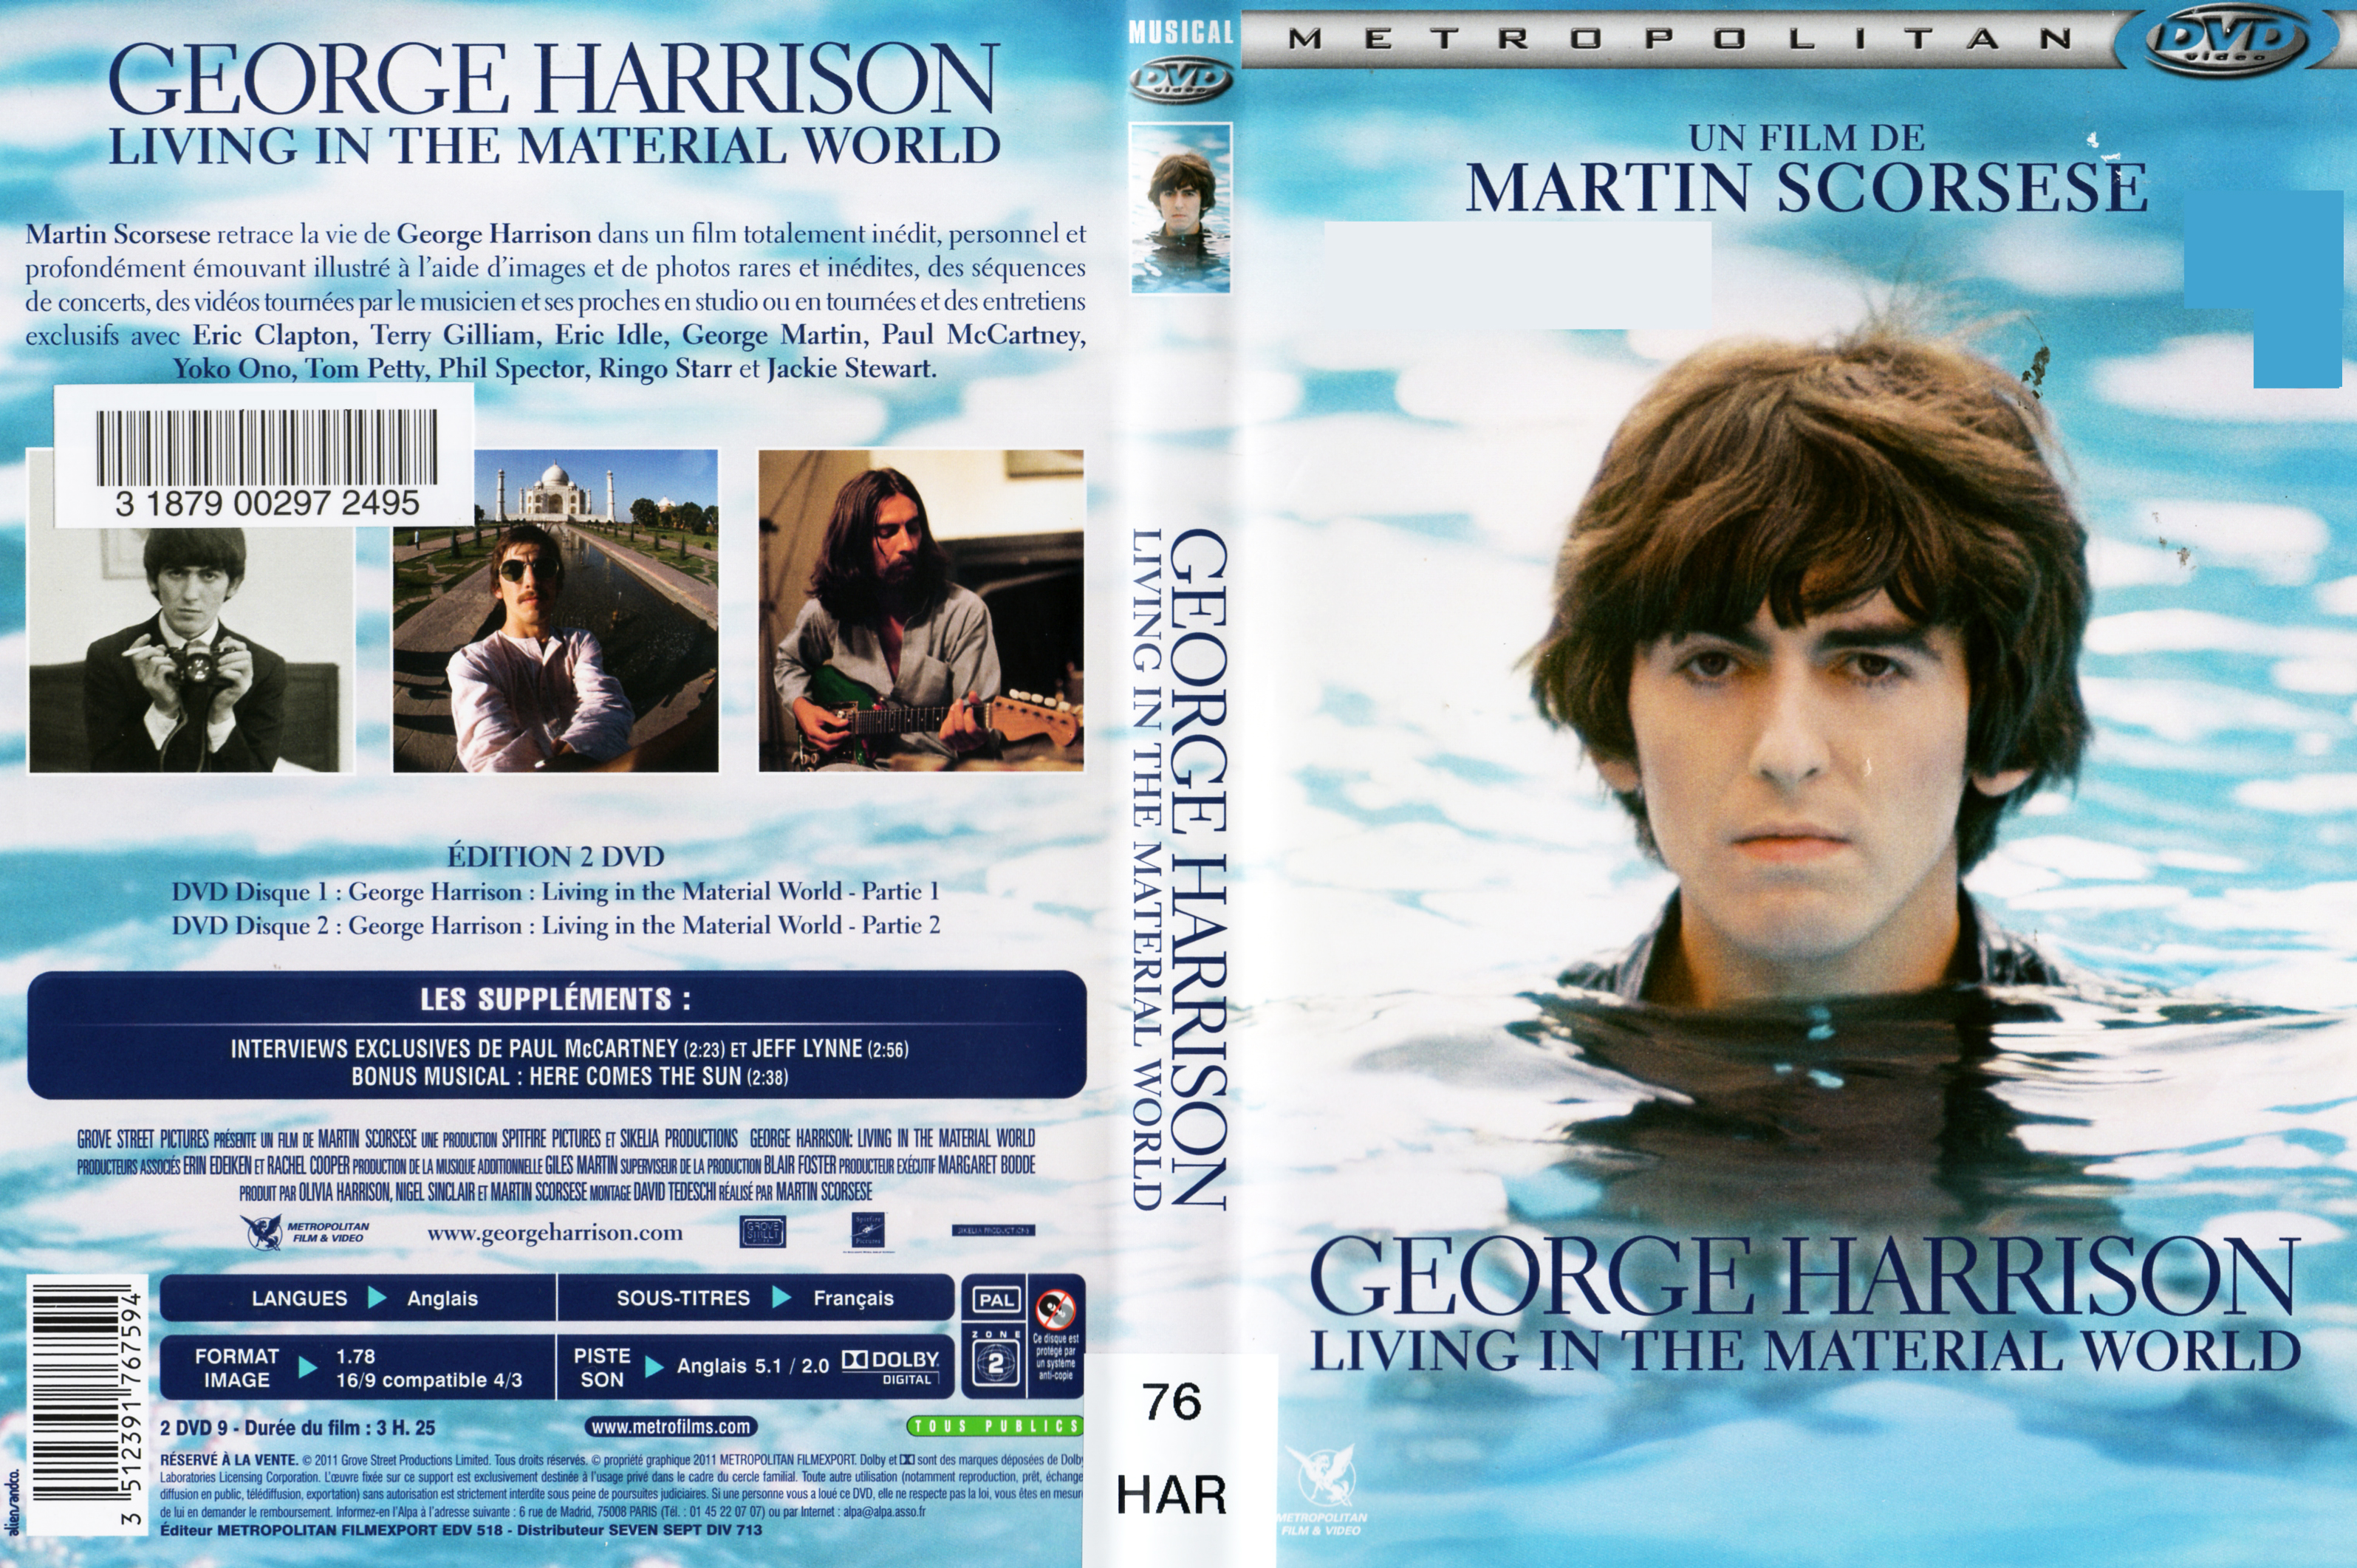 Jaquette DVD George Harrison - Living in the material world